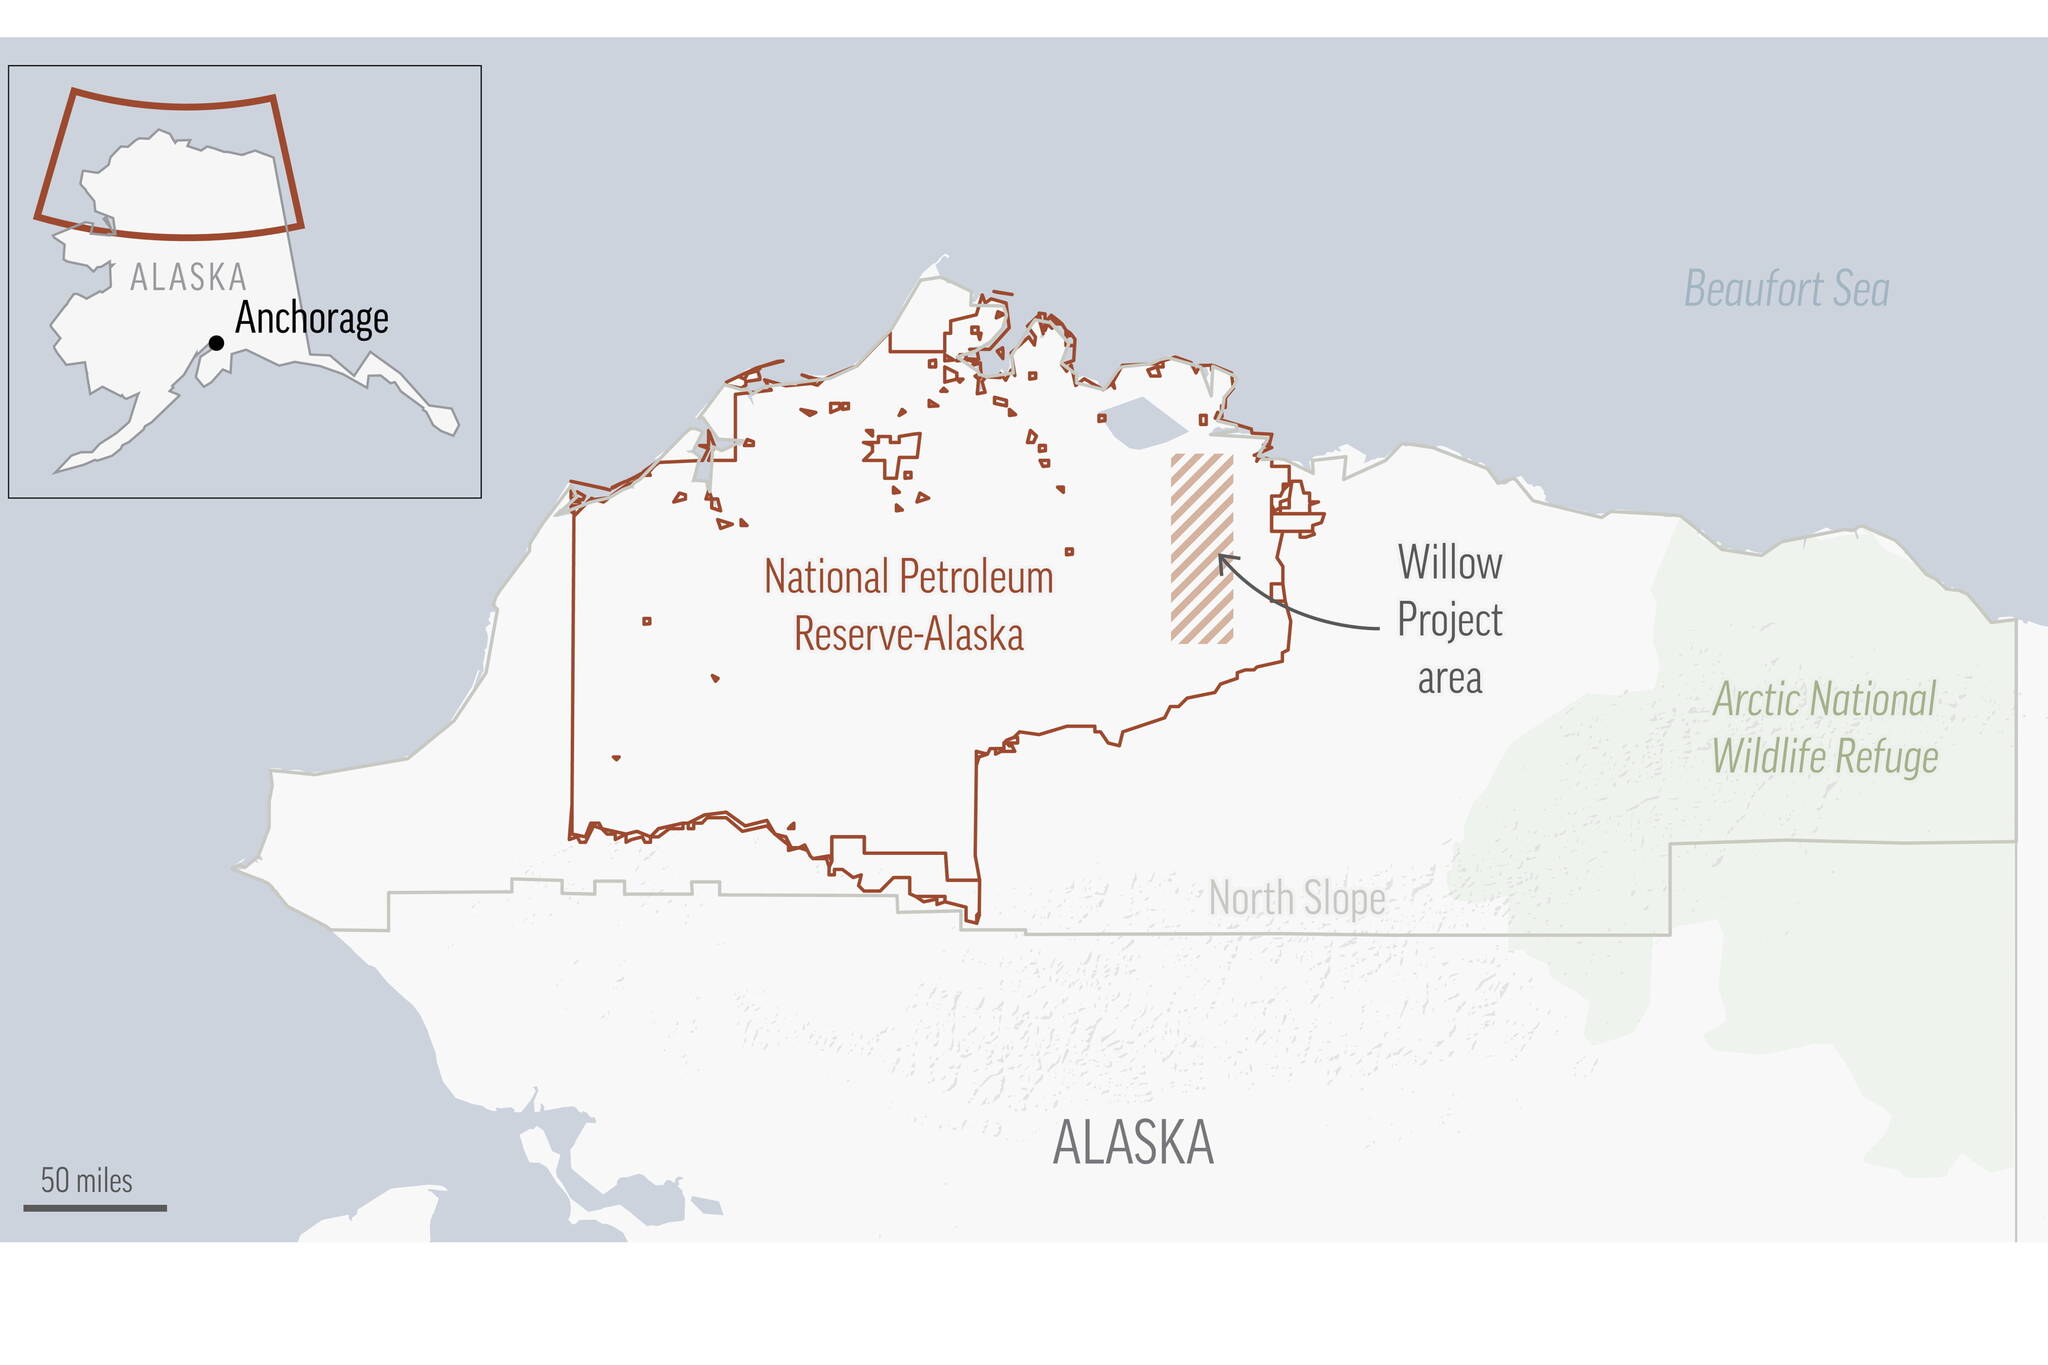 A map shows the location of the Willow oil field project in the National Petroleum Reserve-Alaska, where more than 200 drills are scheduled to be drilled during a 30-year period if approved. (The Associated Press)